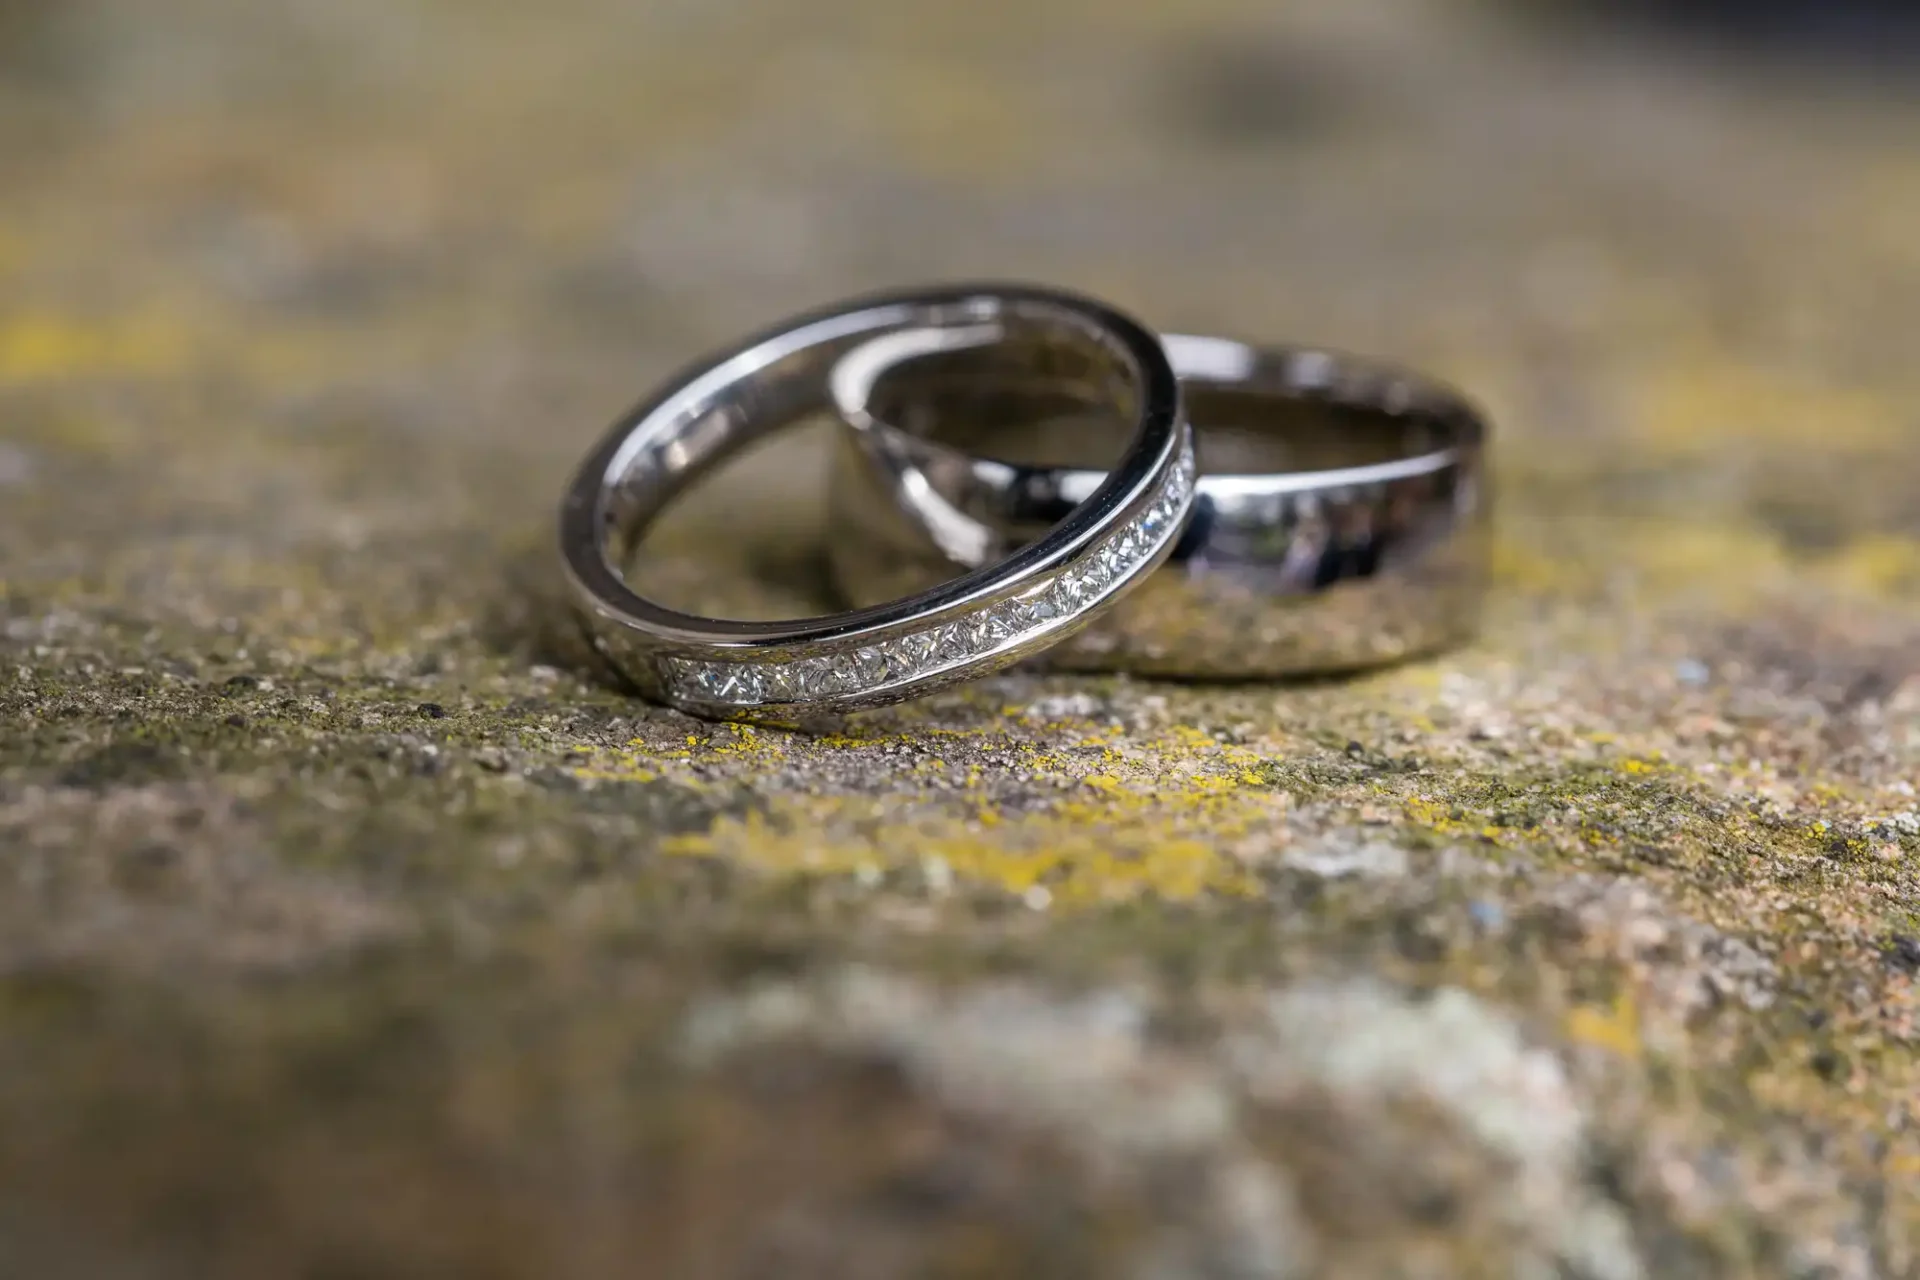 Two wedding rings on a rough, mossy surface with selective focus highlighting details on the closer ring.